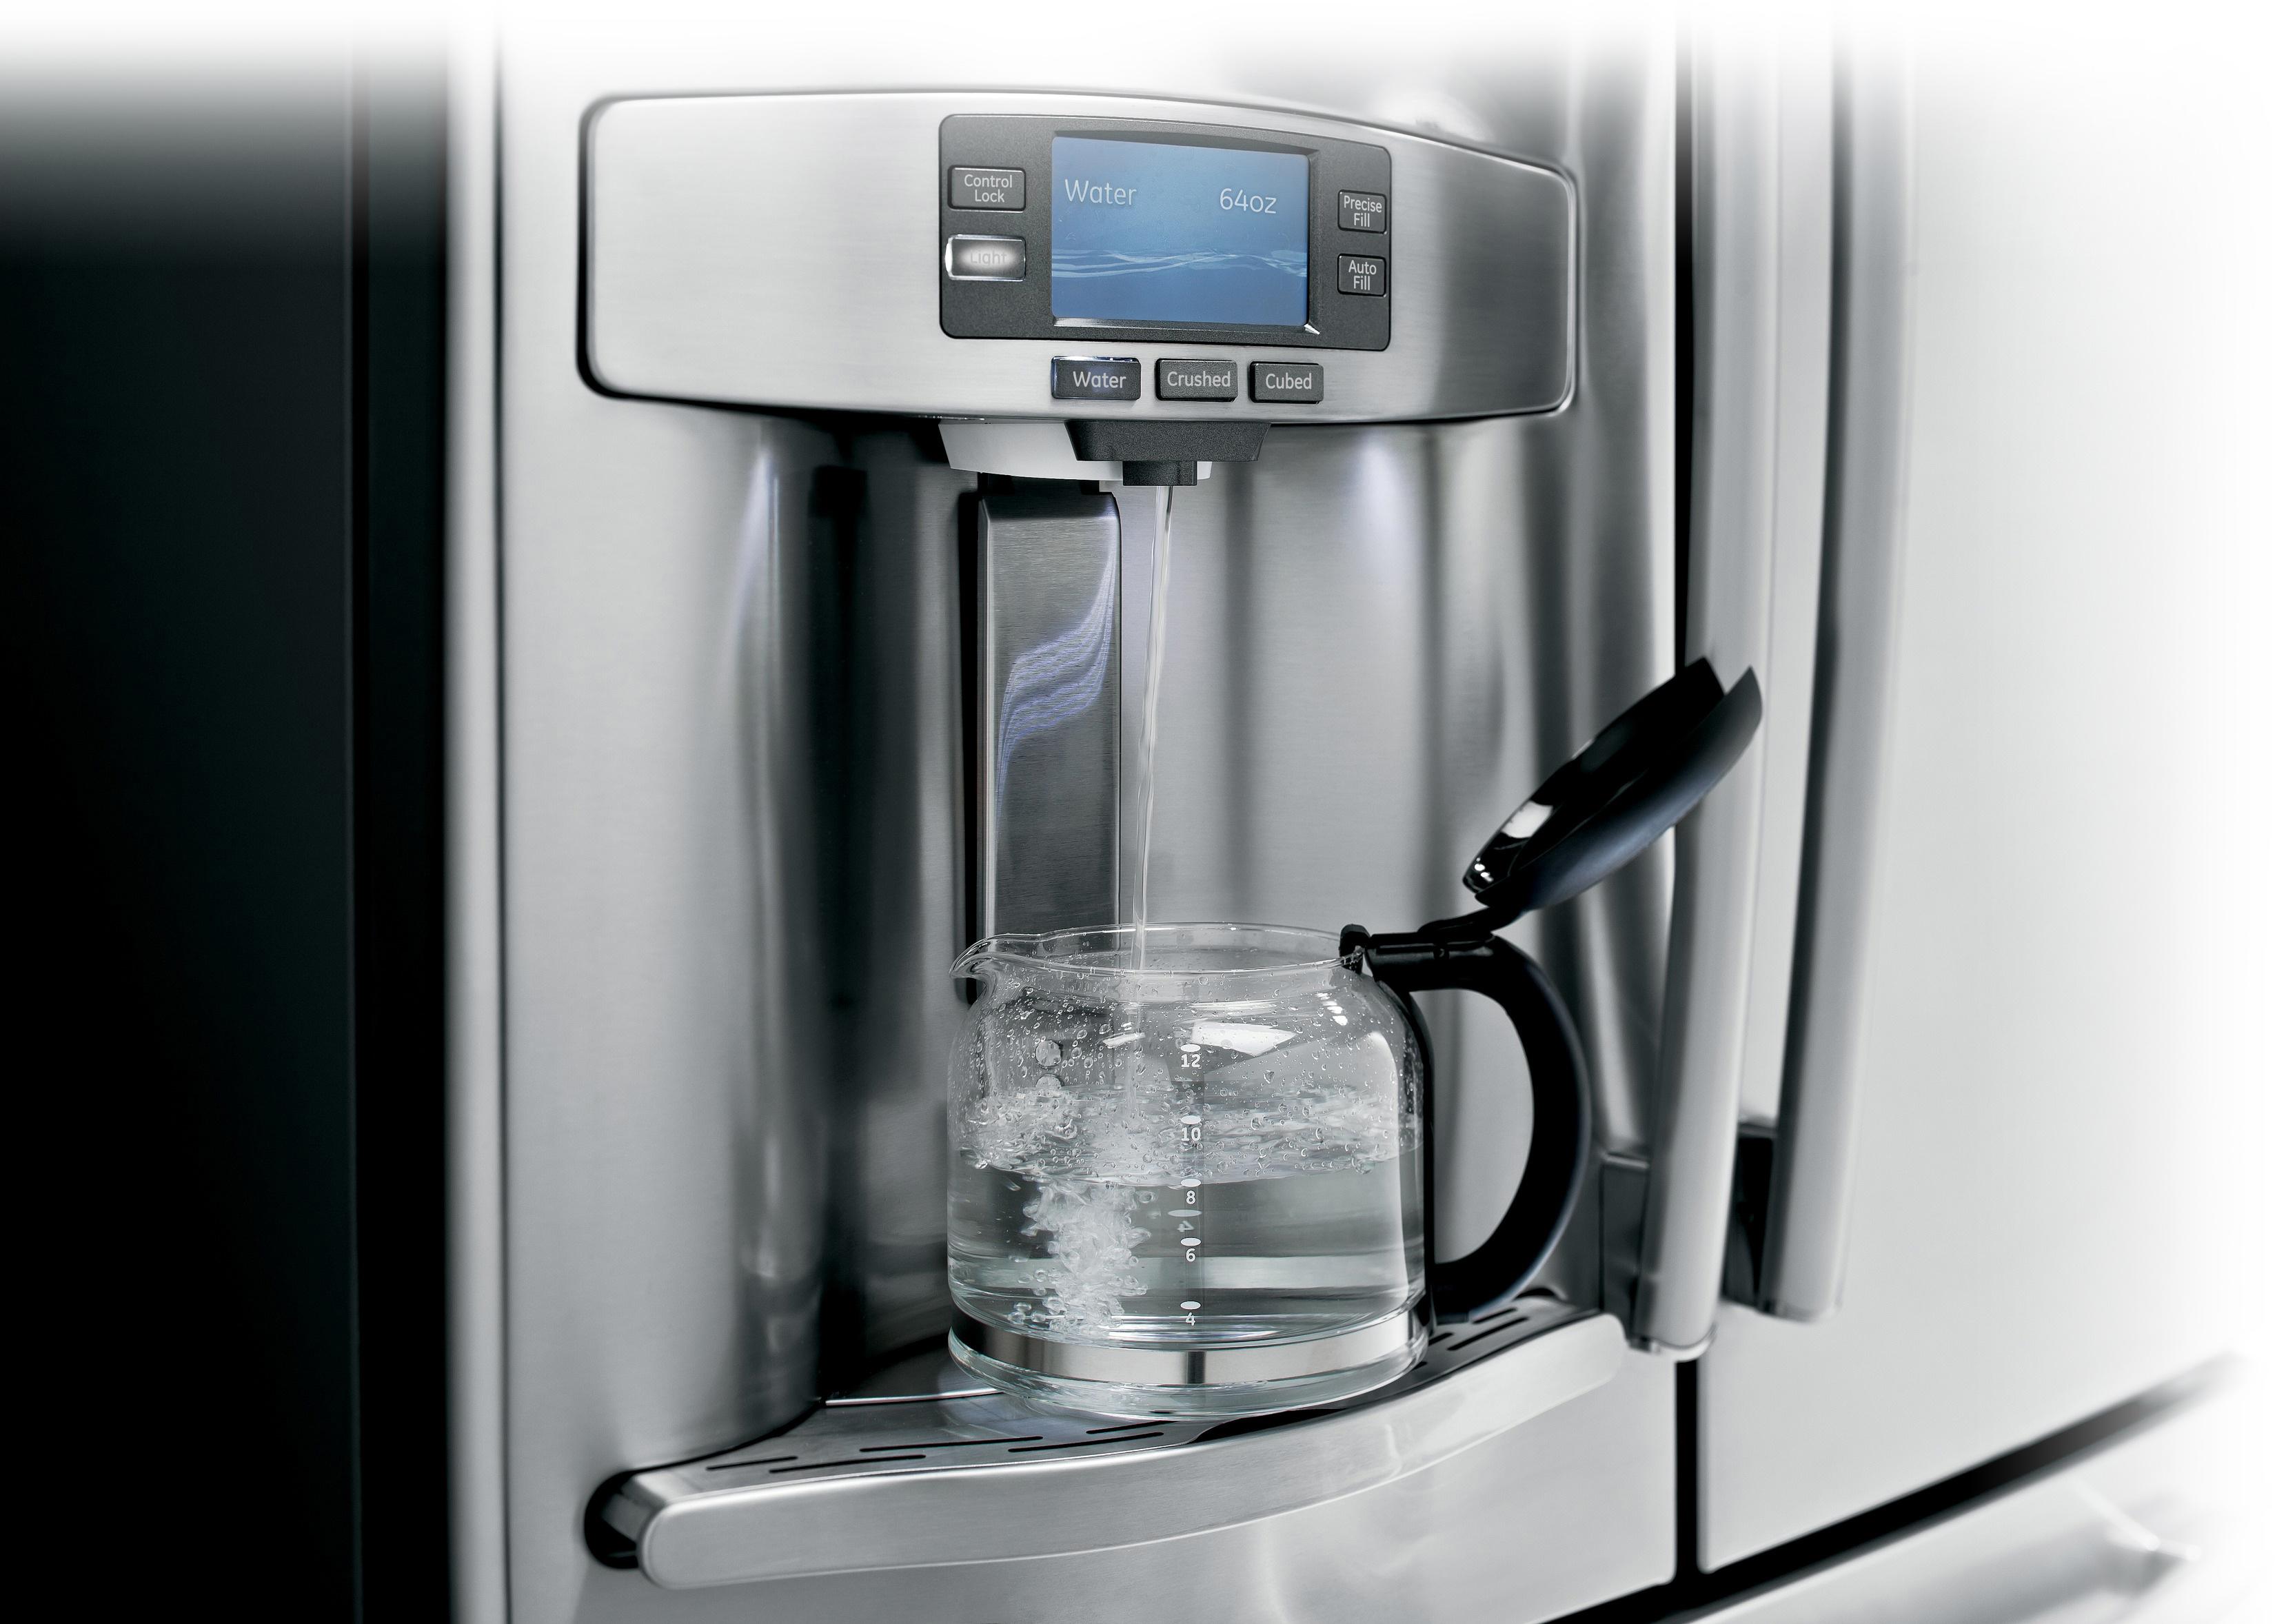 Water Dispenser For Home: Do's And Don'ts